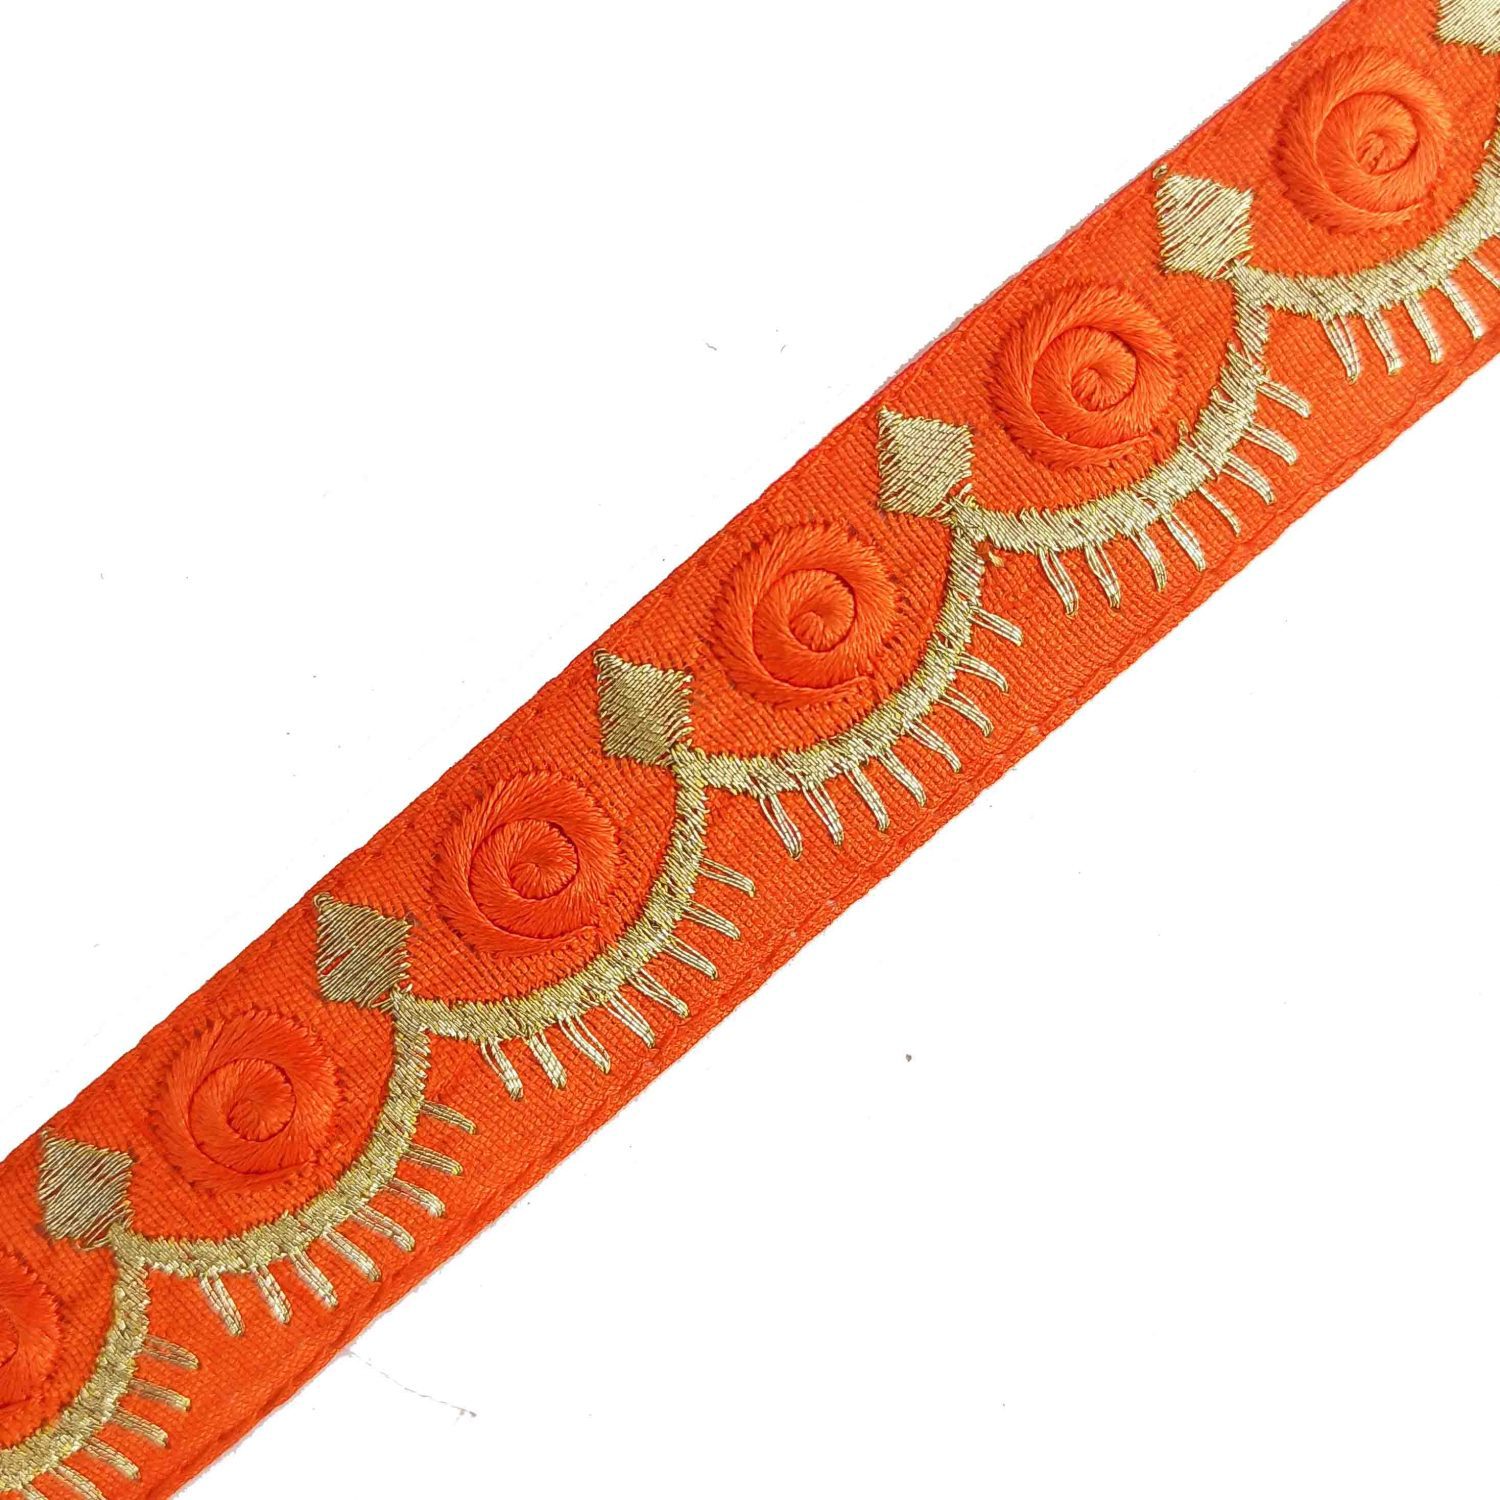 Hesch 9 Orange lace Border, Orange lace for Saree Border, Orange Colour  lace Border for Dupatta, Orange Embroidery lace - 18 Metres Lace Reel